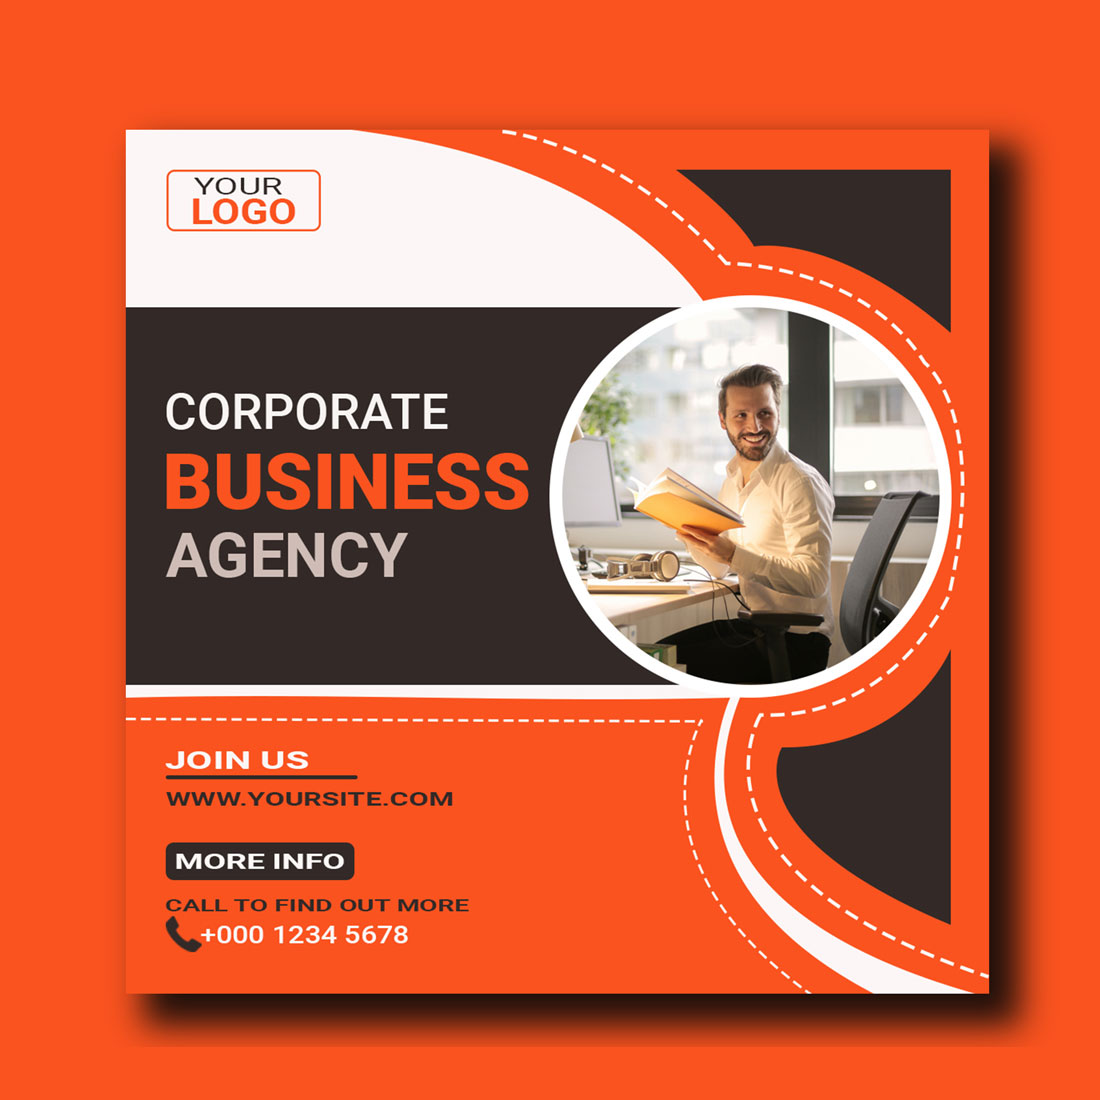 Corporate Business Agency cover image.